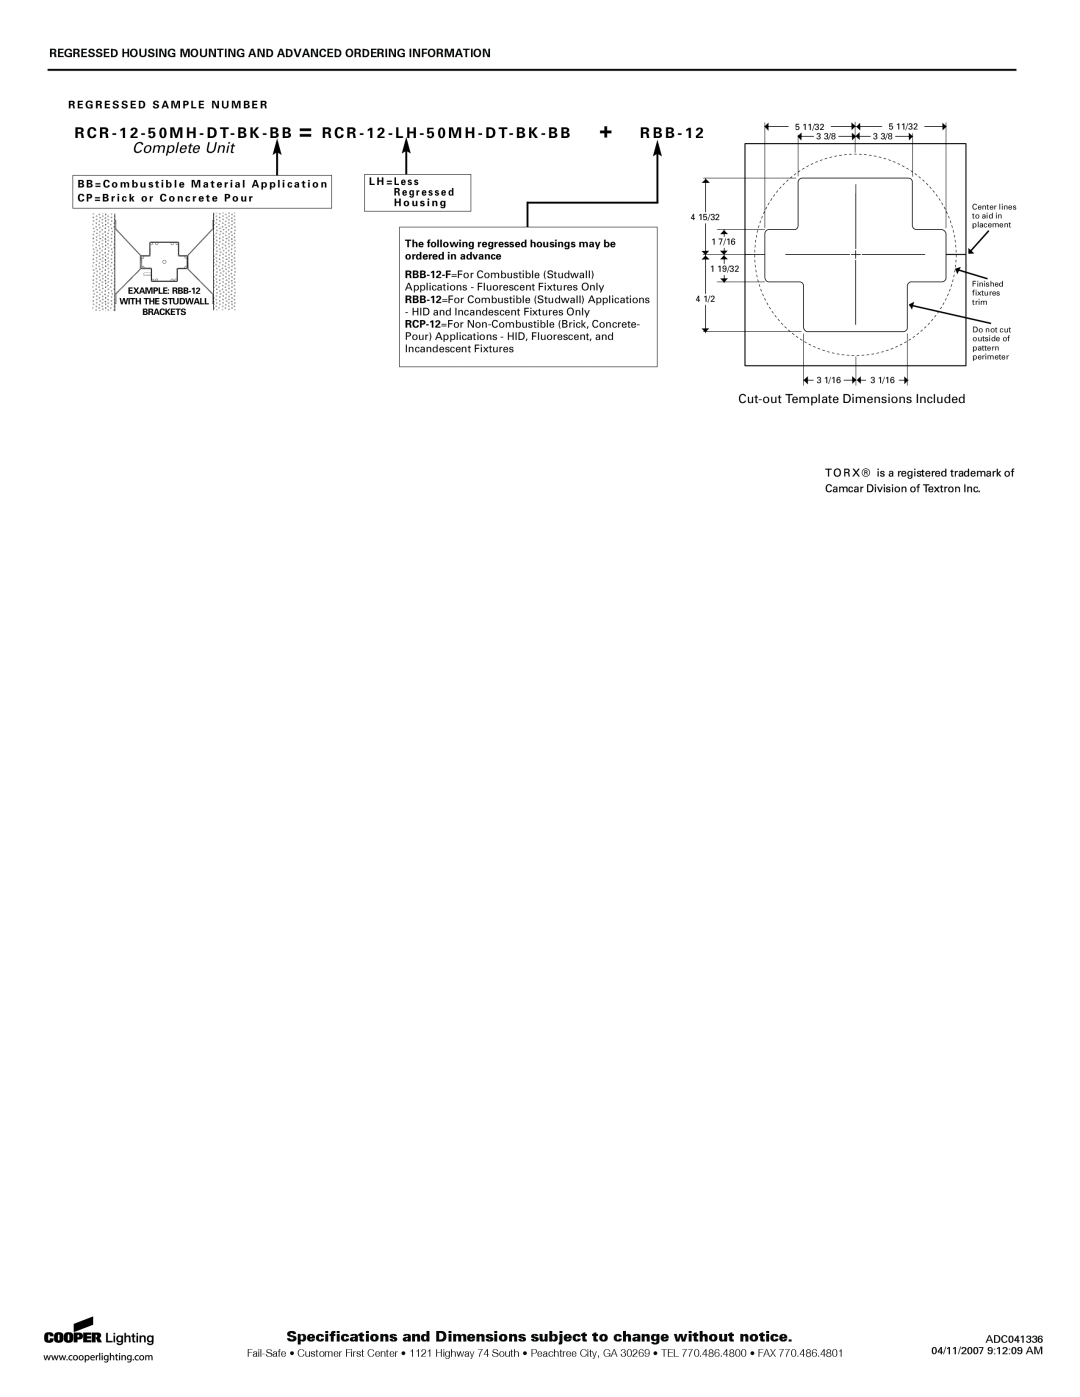 Cooper Lighting Compass 12 specifications + R B B, Complete Unit, Cut-outTemplate Dimensions Included 